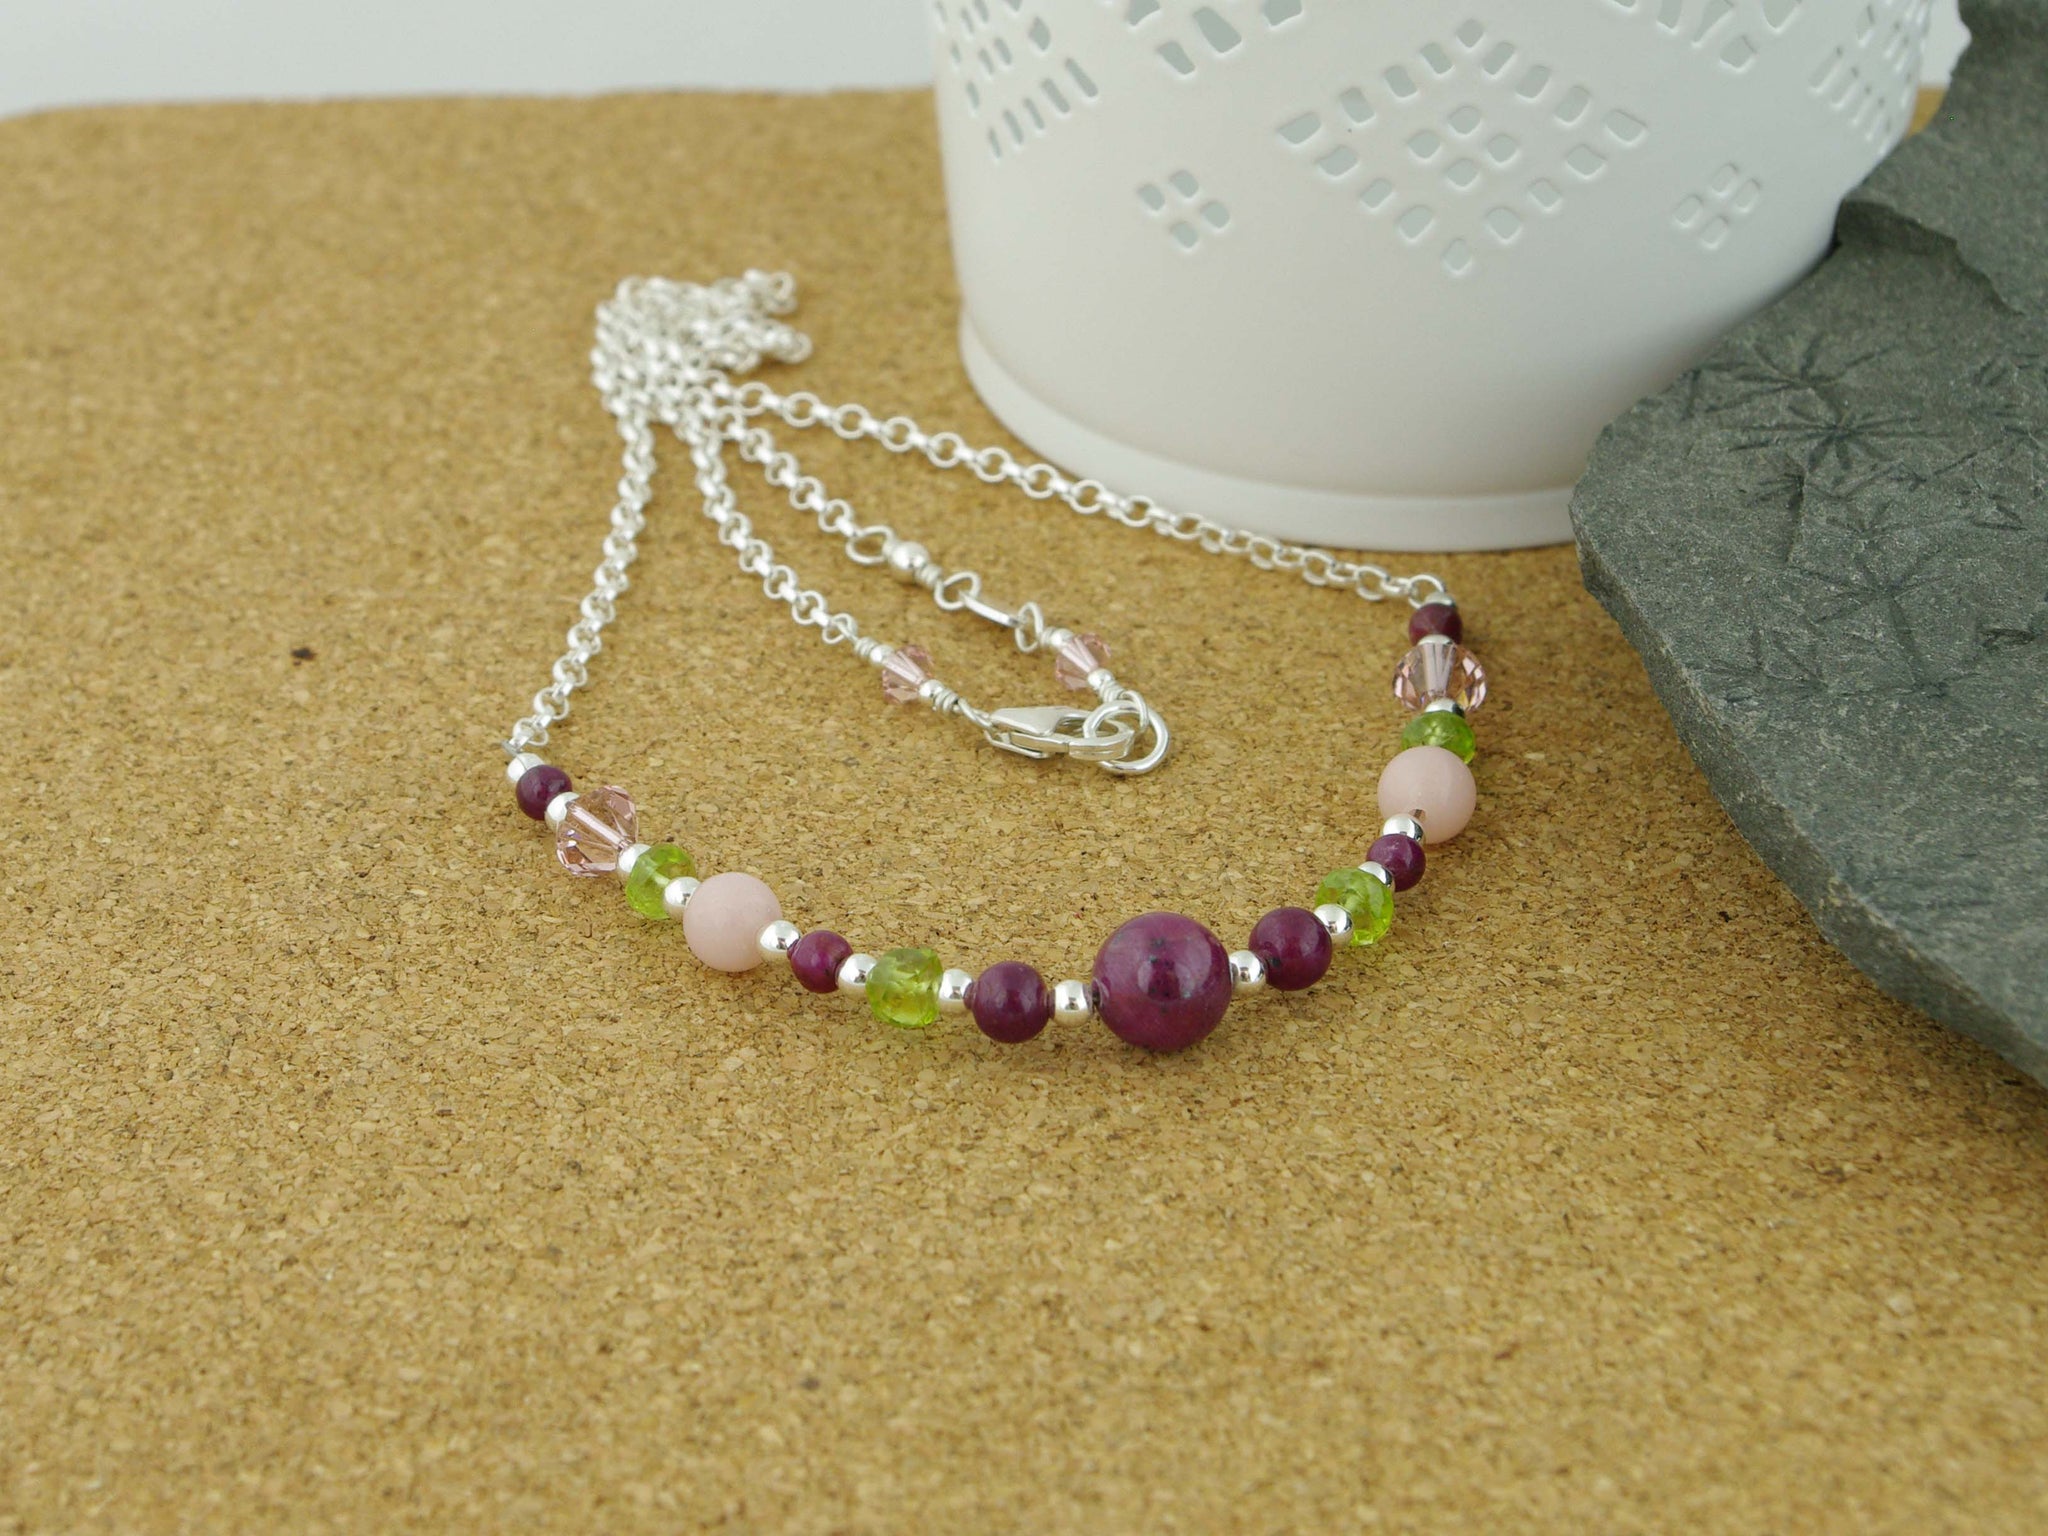 Desire Necklace - Ruby, Pink Opal, Peridot and Swarovski at Jewellery by Linda